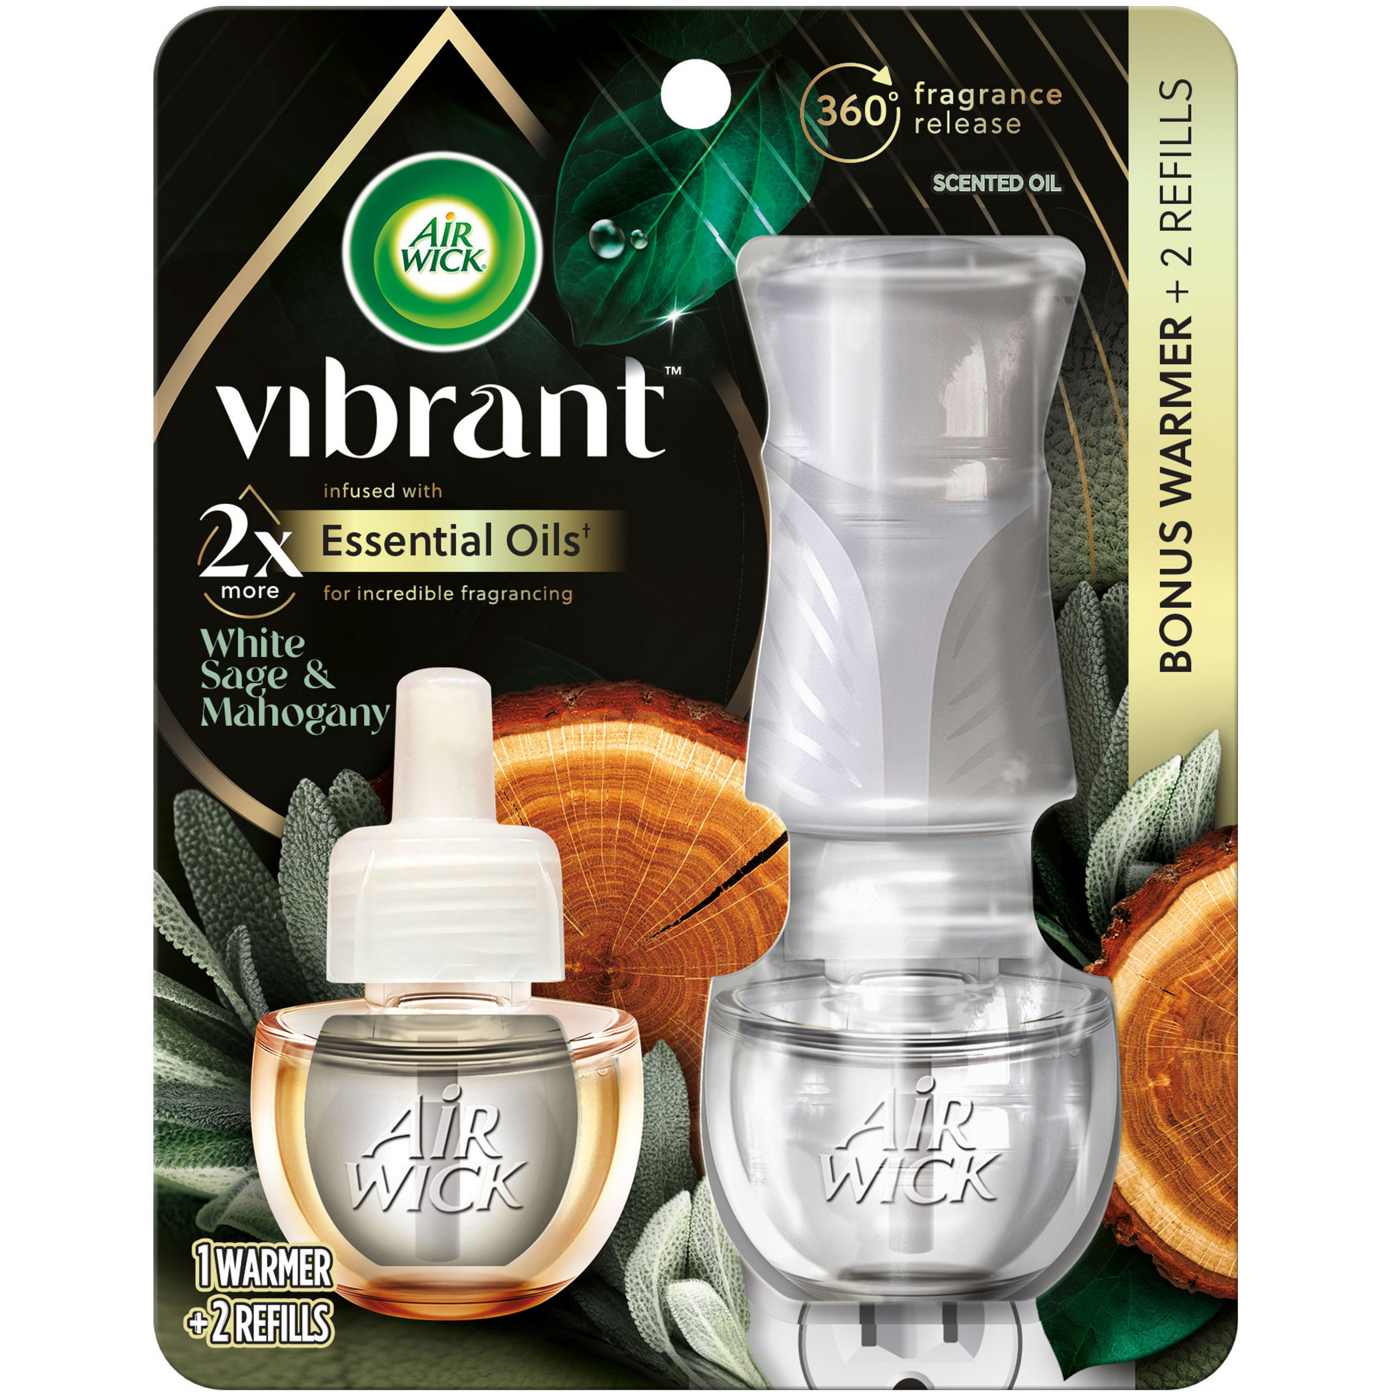 Air Wick Vibrant Scented Oil Warmer & Refills - White Sage & Mahogany; image 1 of 7